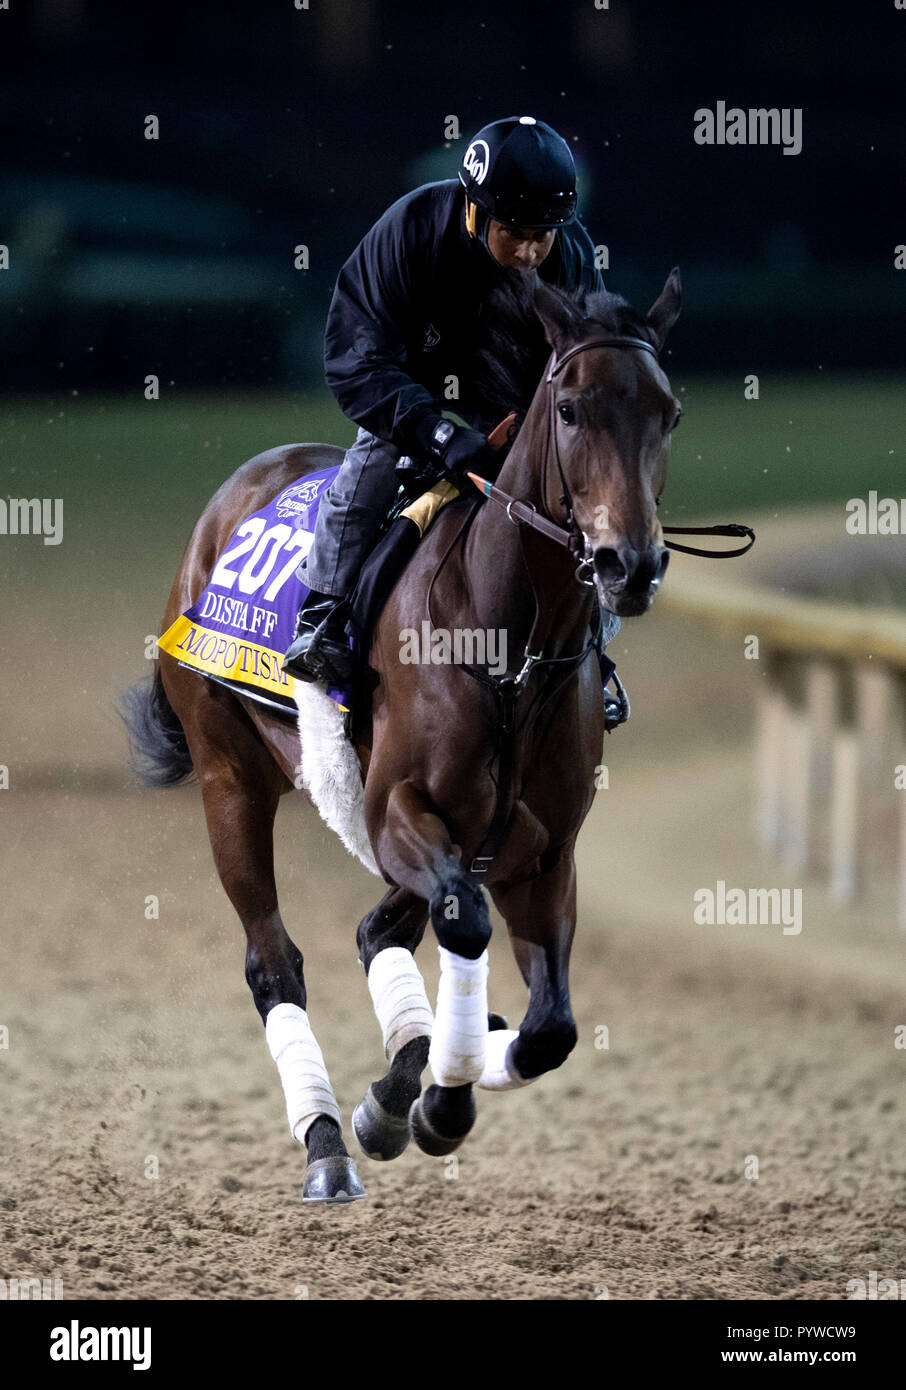 Louisville, KY, USA. 30th Oct, 2018. October 30, 2018 : Mopotism, trained by Doug F. O'Neill, exercises in preparation for the Breeders' Cup Filly & Mare Sprint at Churchill Downs on October 30, 2018 in Louisville, Kentucky. Michael McInally/Eclipse Sportswire/CSM/Alamy Live News Stock Photo